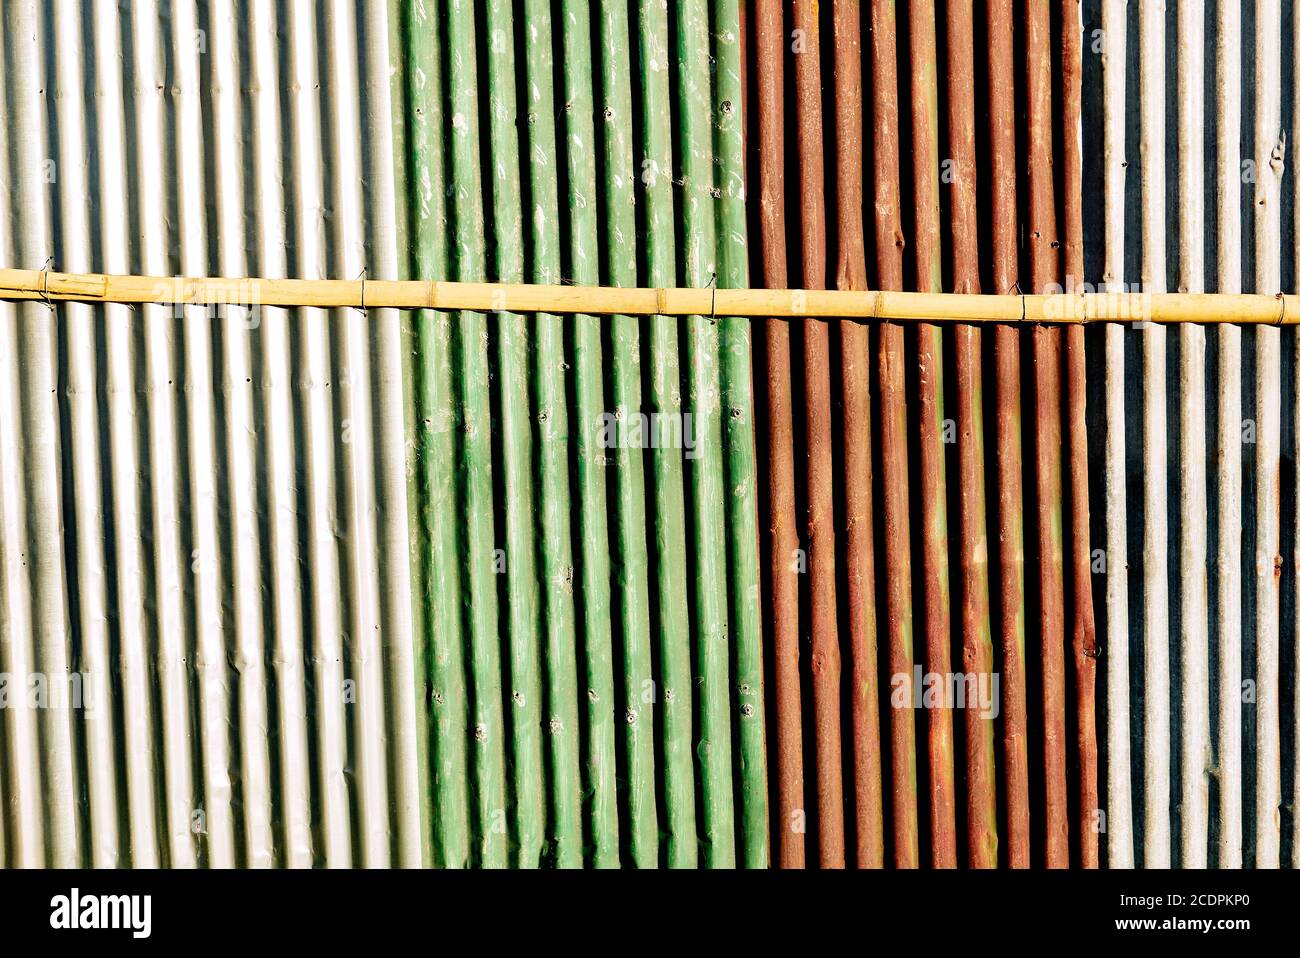 Multicolored painted corrugated wall gives horizontal shades, stripes. One horizontal bamboo stick is holding the rusty fence together. Stock Photo